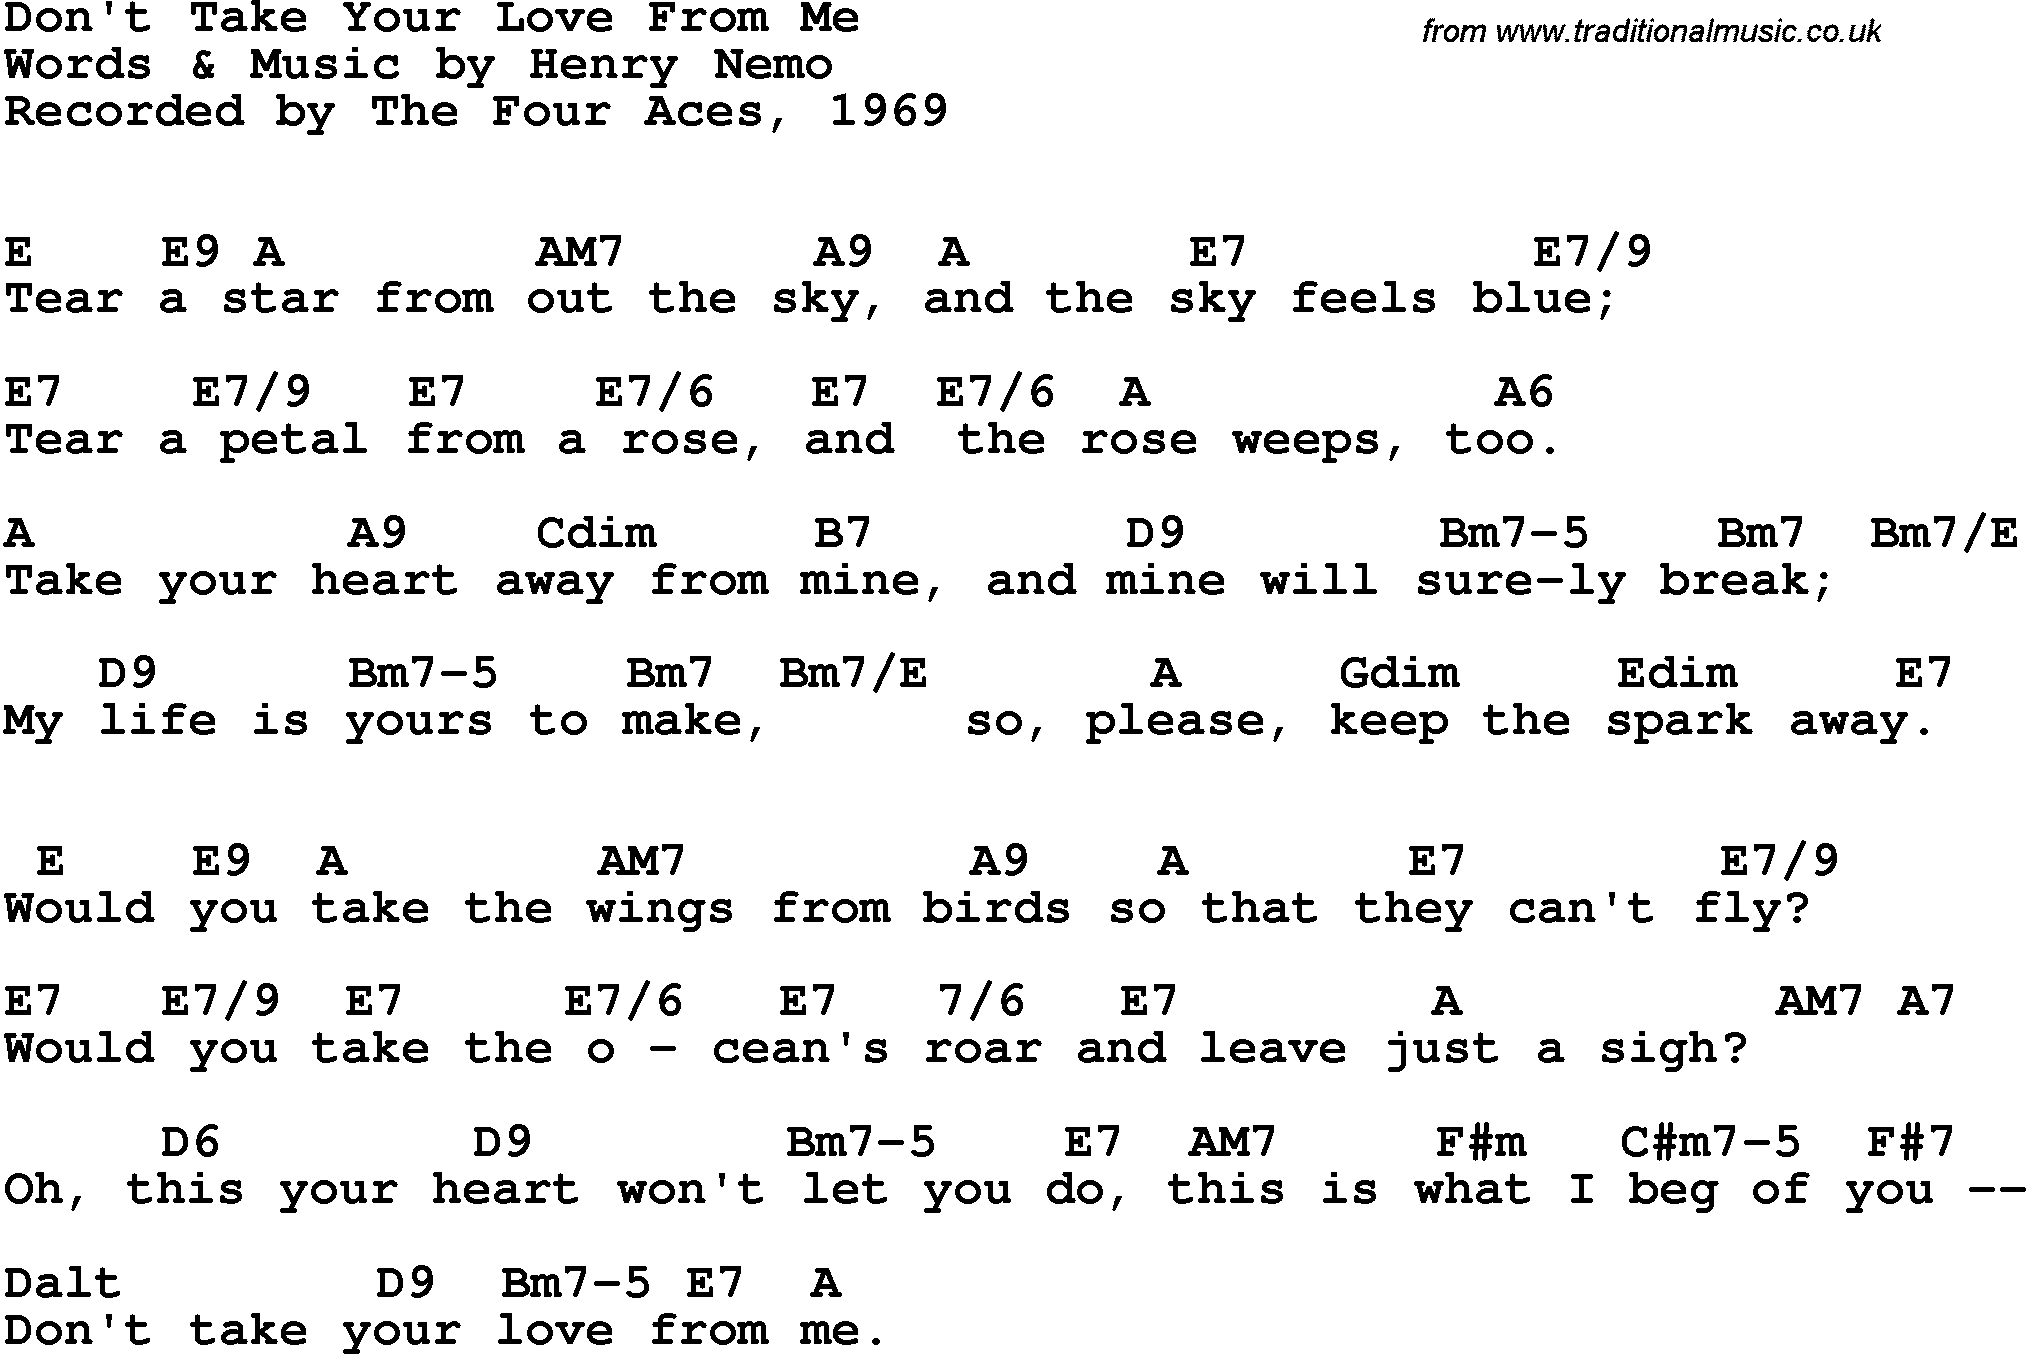 Song Lyrics with guitar chords for Don't Take Your Love From Me - The Four Aces, 1969